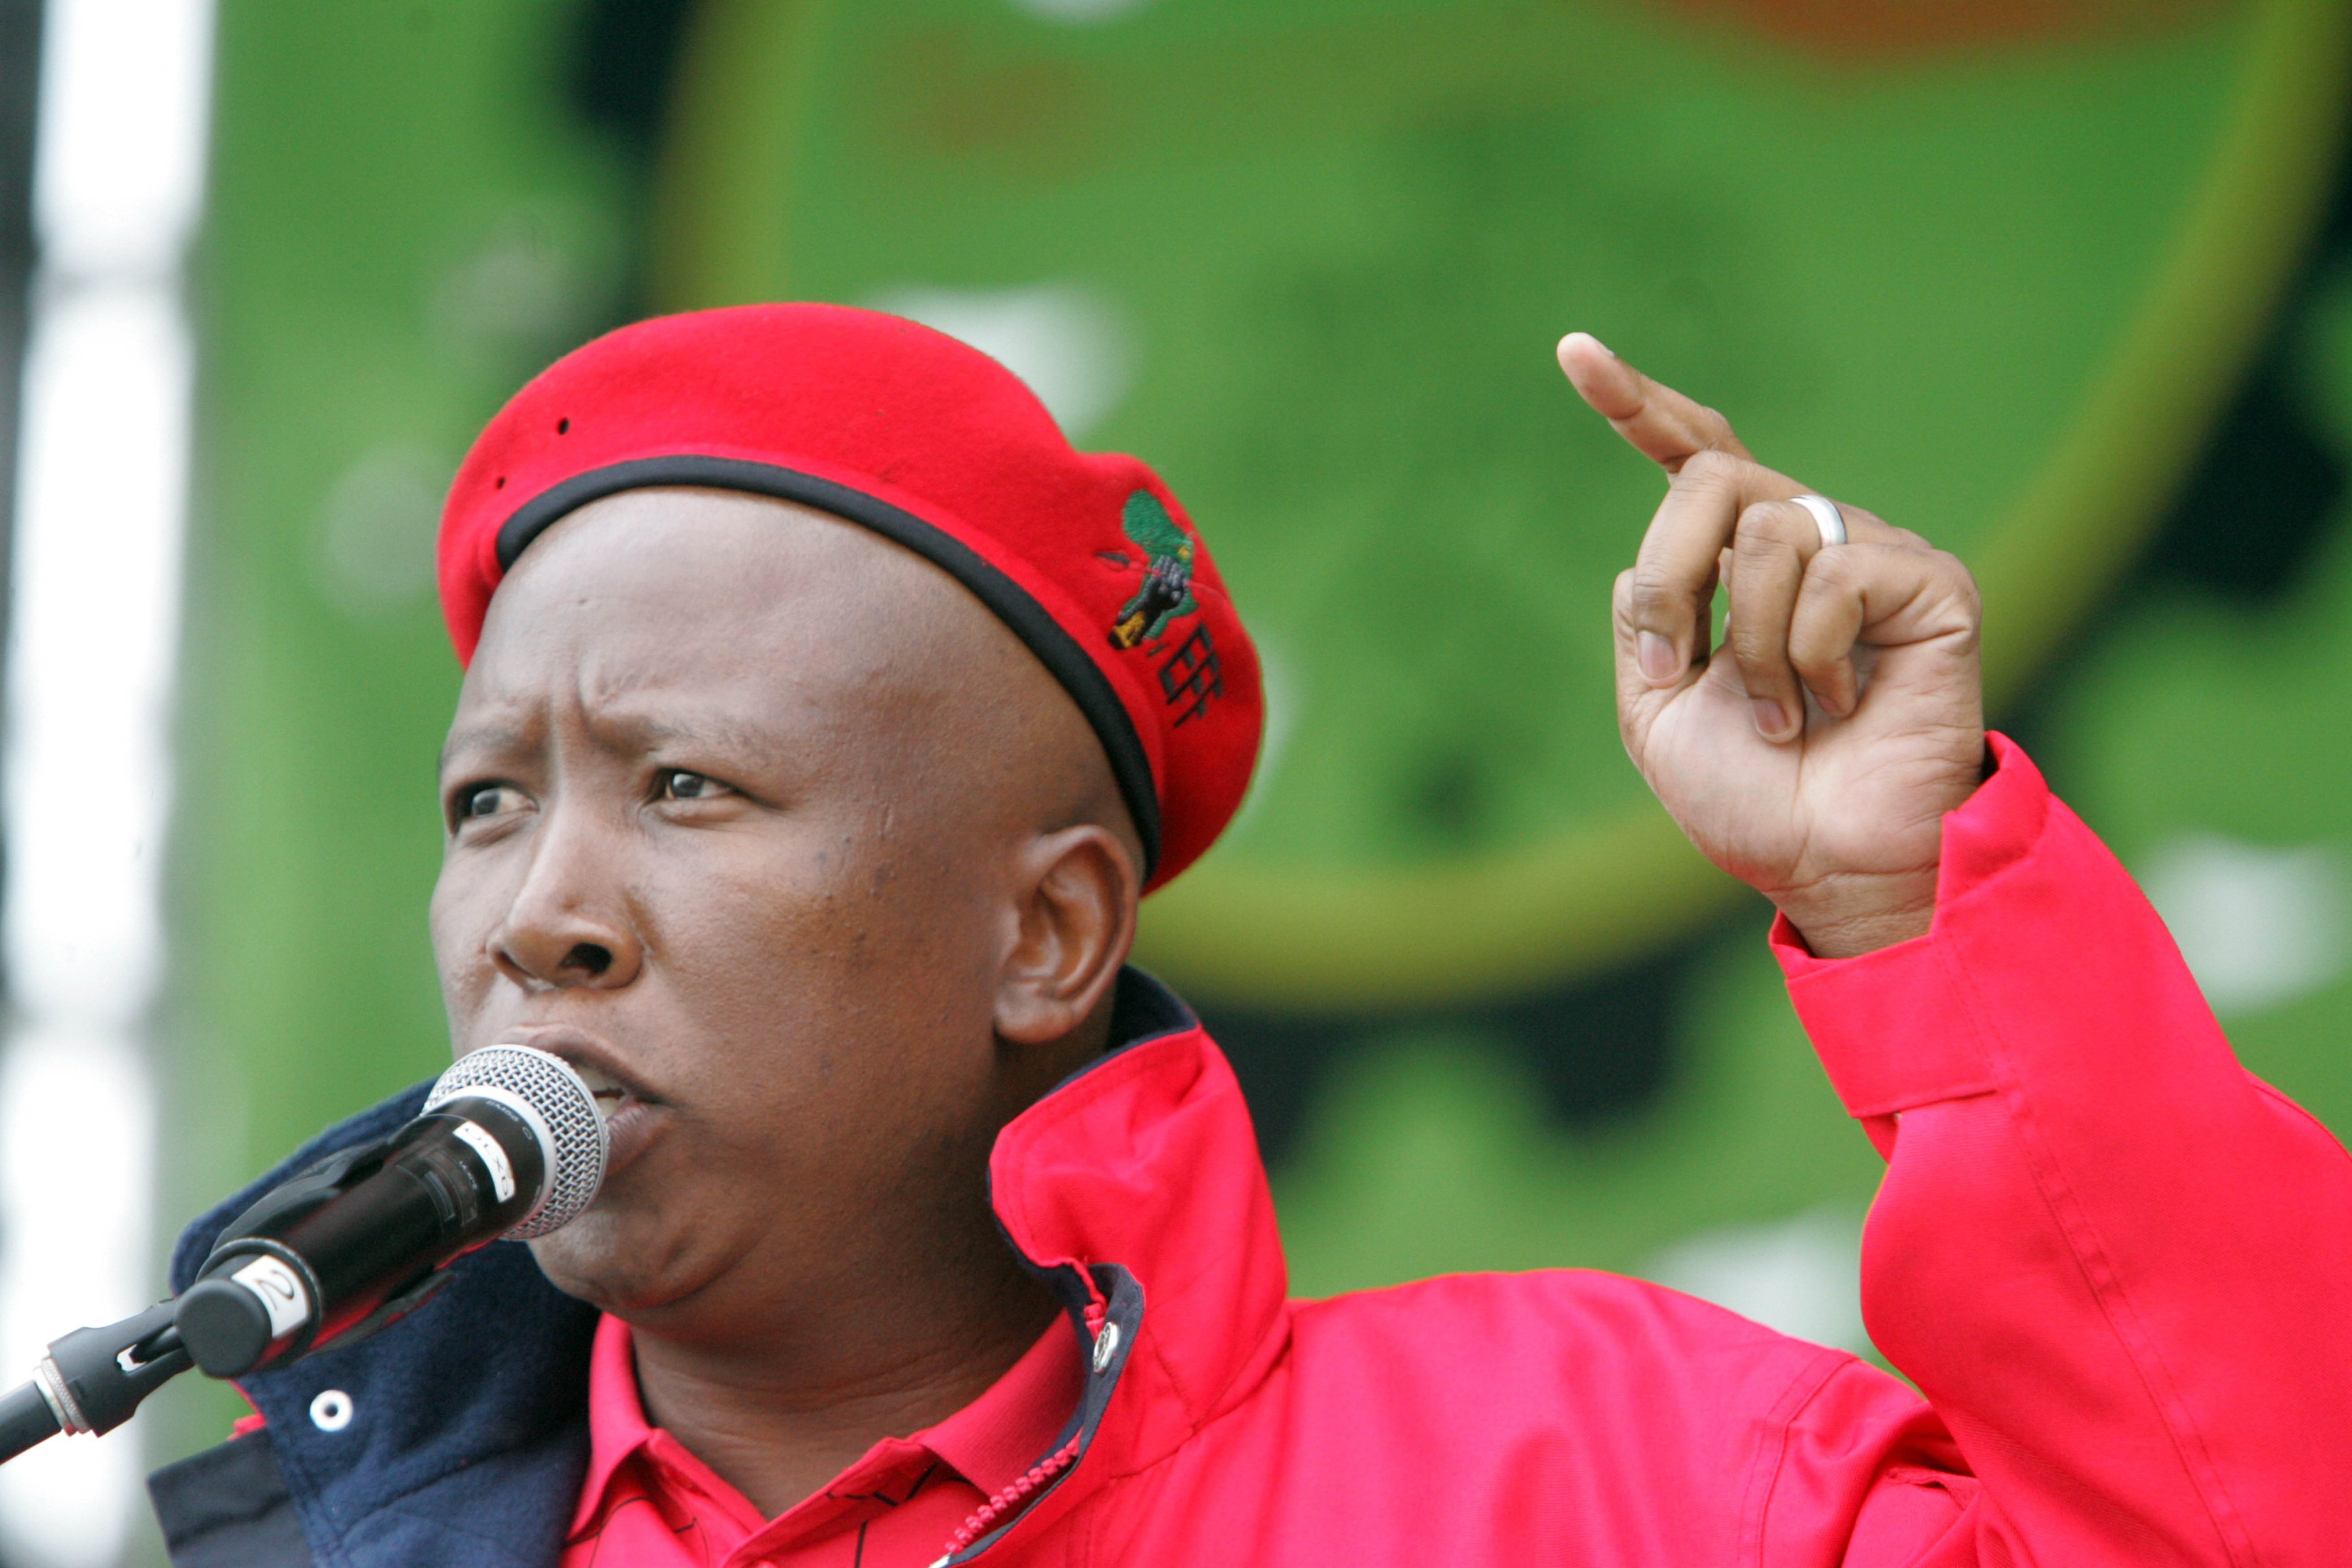 Economic Freedom Fighters (EFF) leader Julius Malema delivers his speech during the commemoration of the 2012 Marikana massacre on August 16 2016 in Rustenburg, South Africa. (Antonio Muchave/Sowetan/Gallo Images—Getty Images)